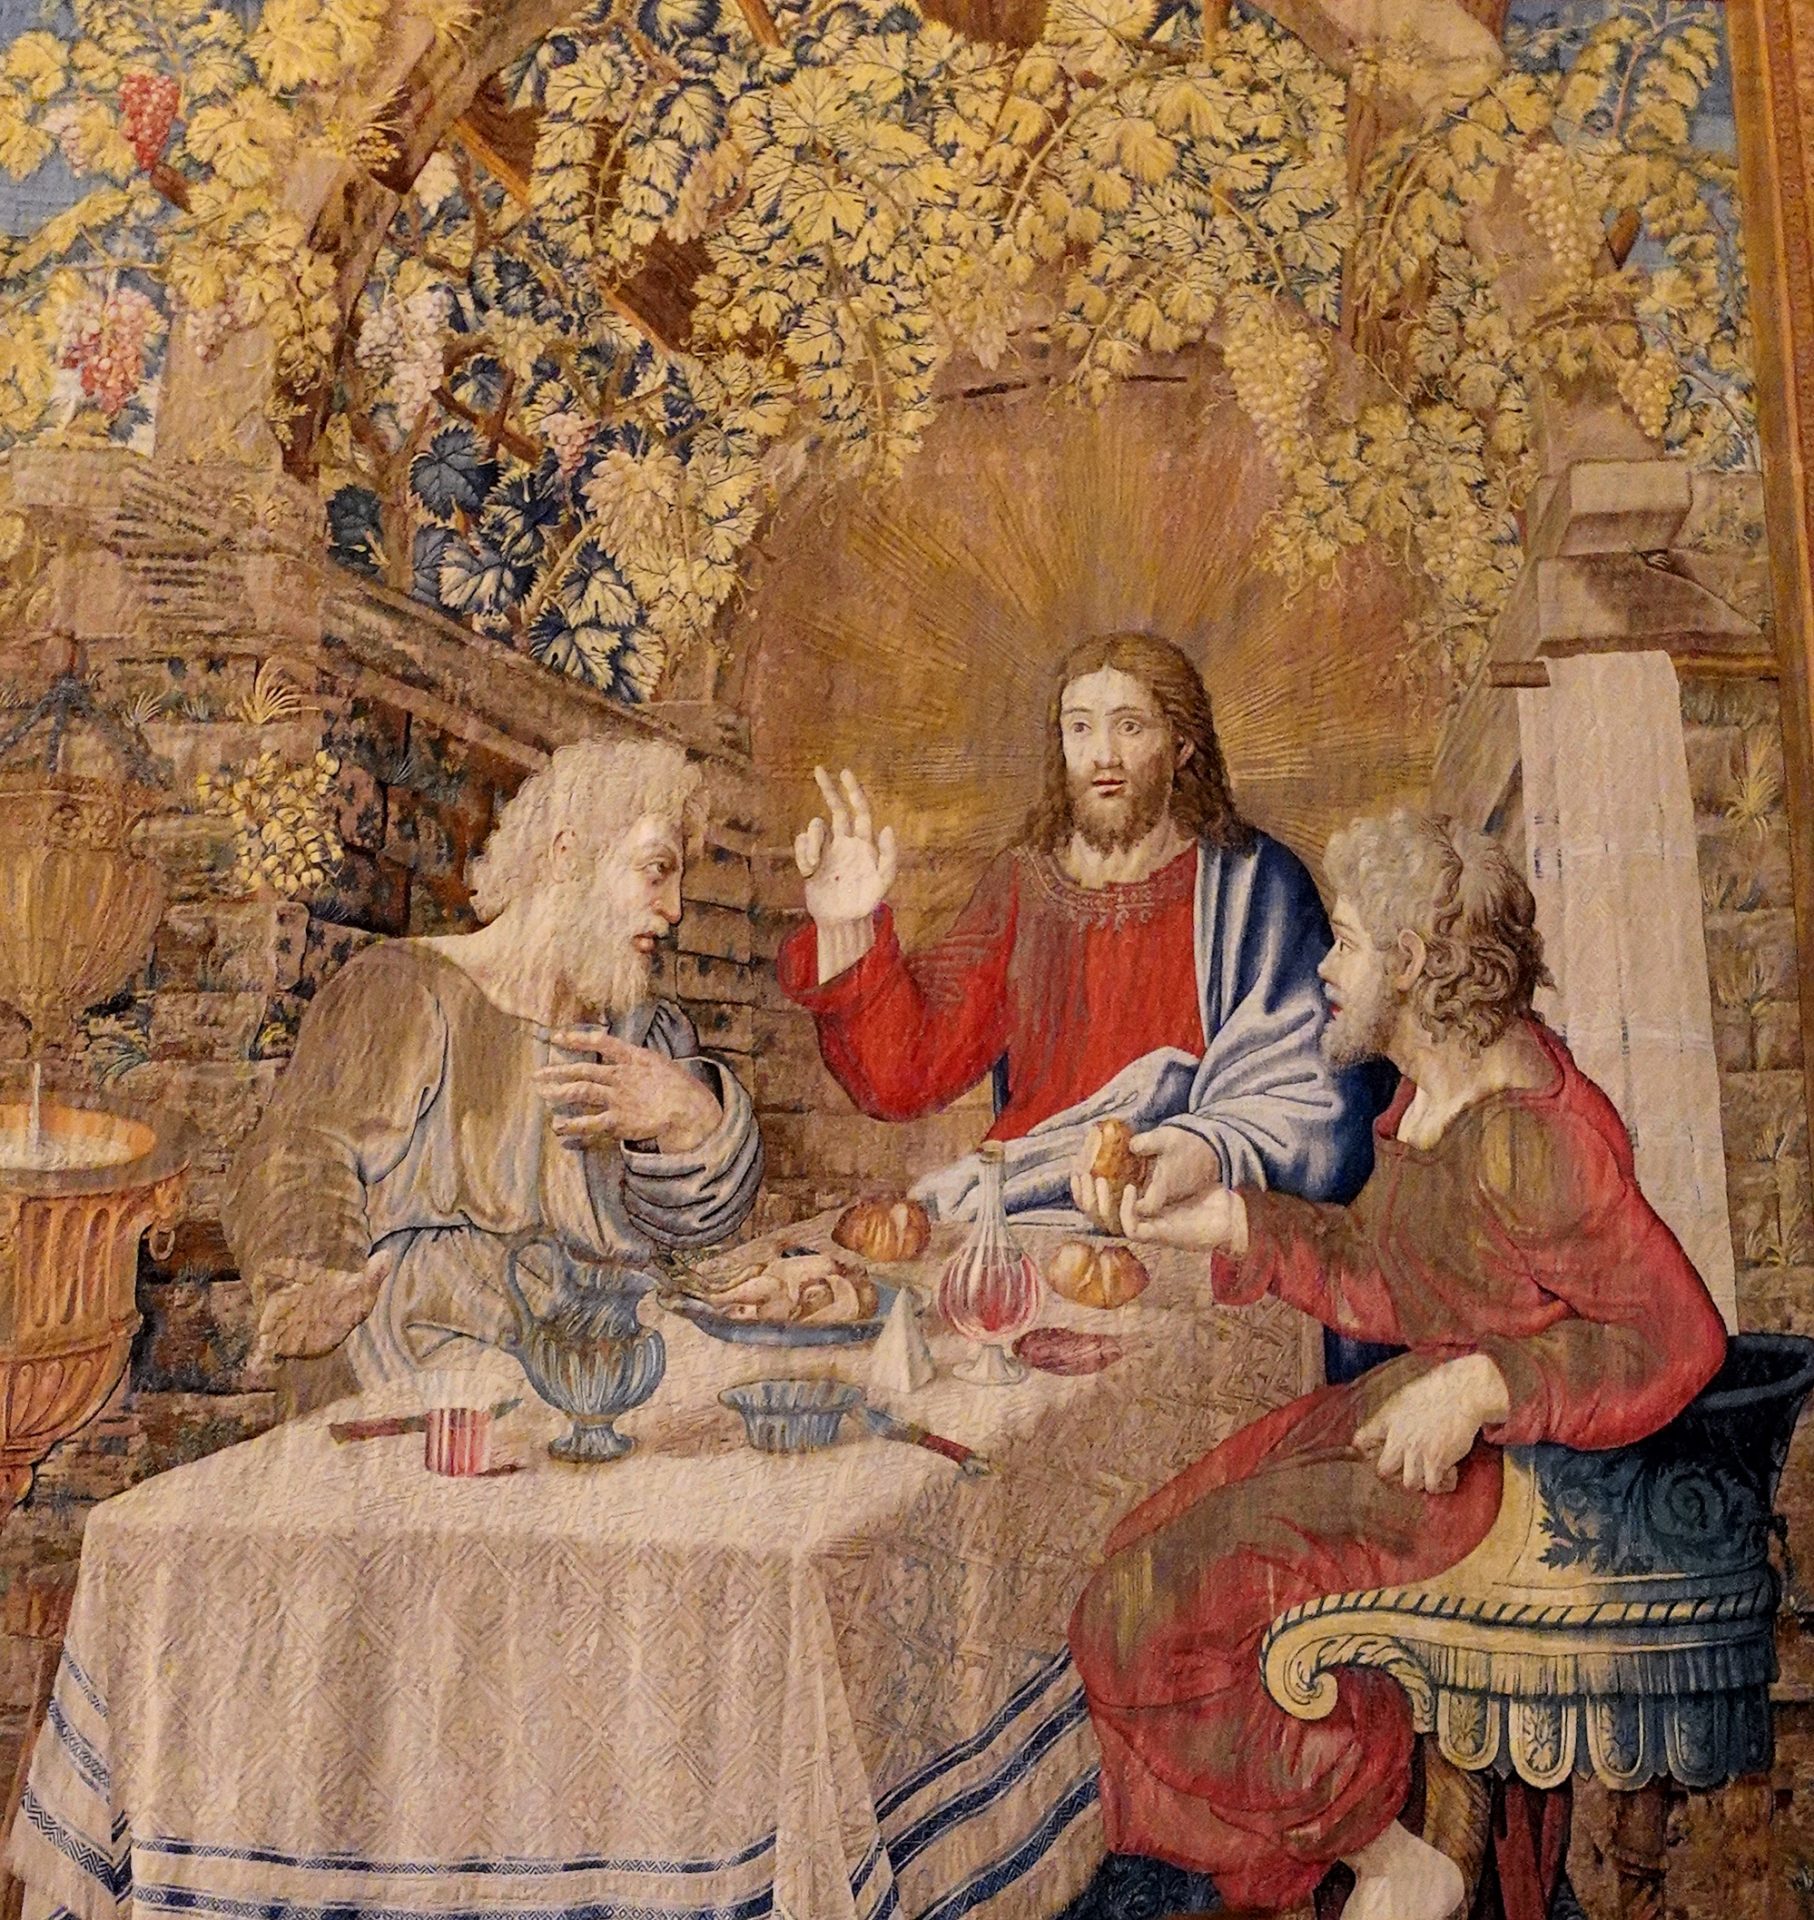 The Supper at Emmaus, Galleria degli Arazzi, Vatican Museum. A Creative Commons photo from flickr.com. Accessed May 6, 2022. https://www.flickr.com/ photos/justaslice/49684829557